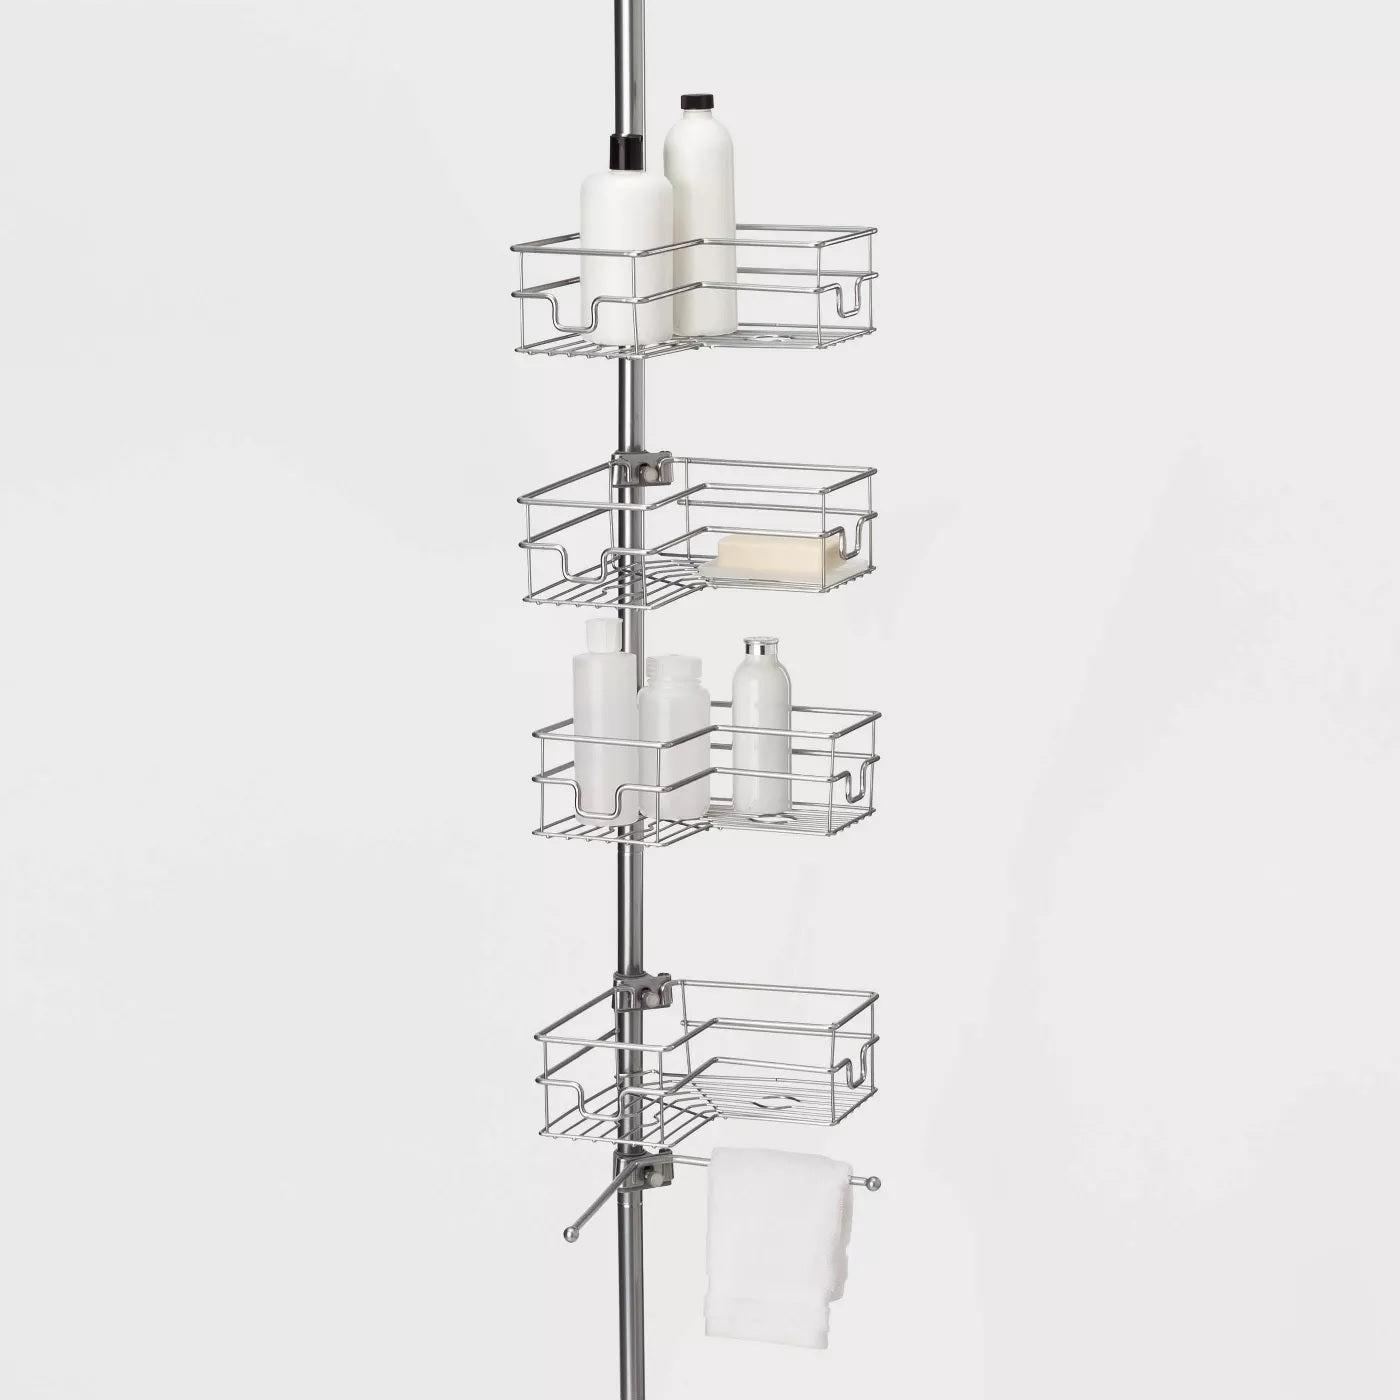 Tension Pole Shower Caddy - Done & Done Home